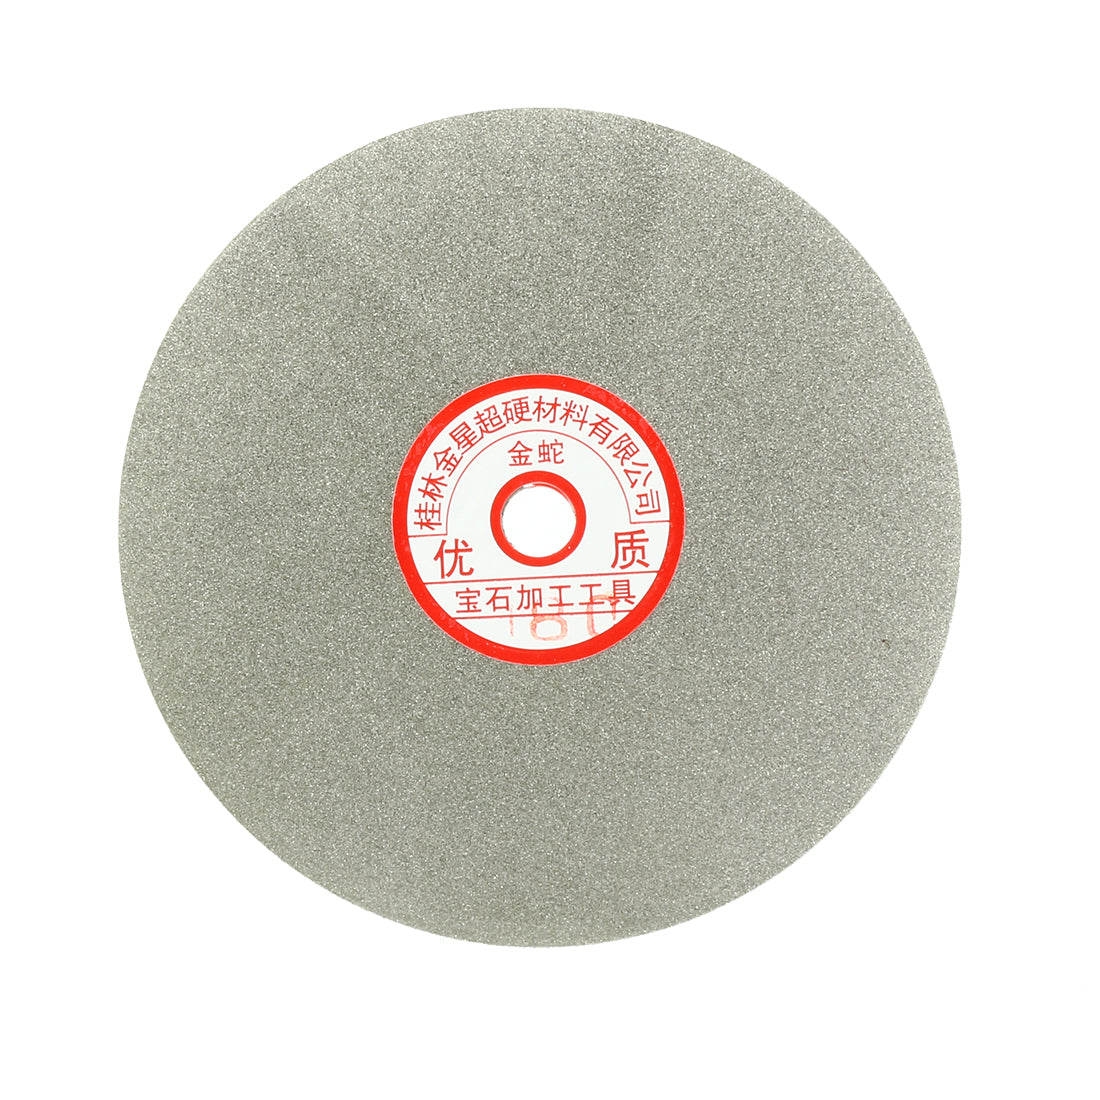 uxcell Uxcell 6-inch Grit 180 Diamond Coated Flat Lap Wheel Grinding Sanding Polishing Disc